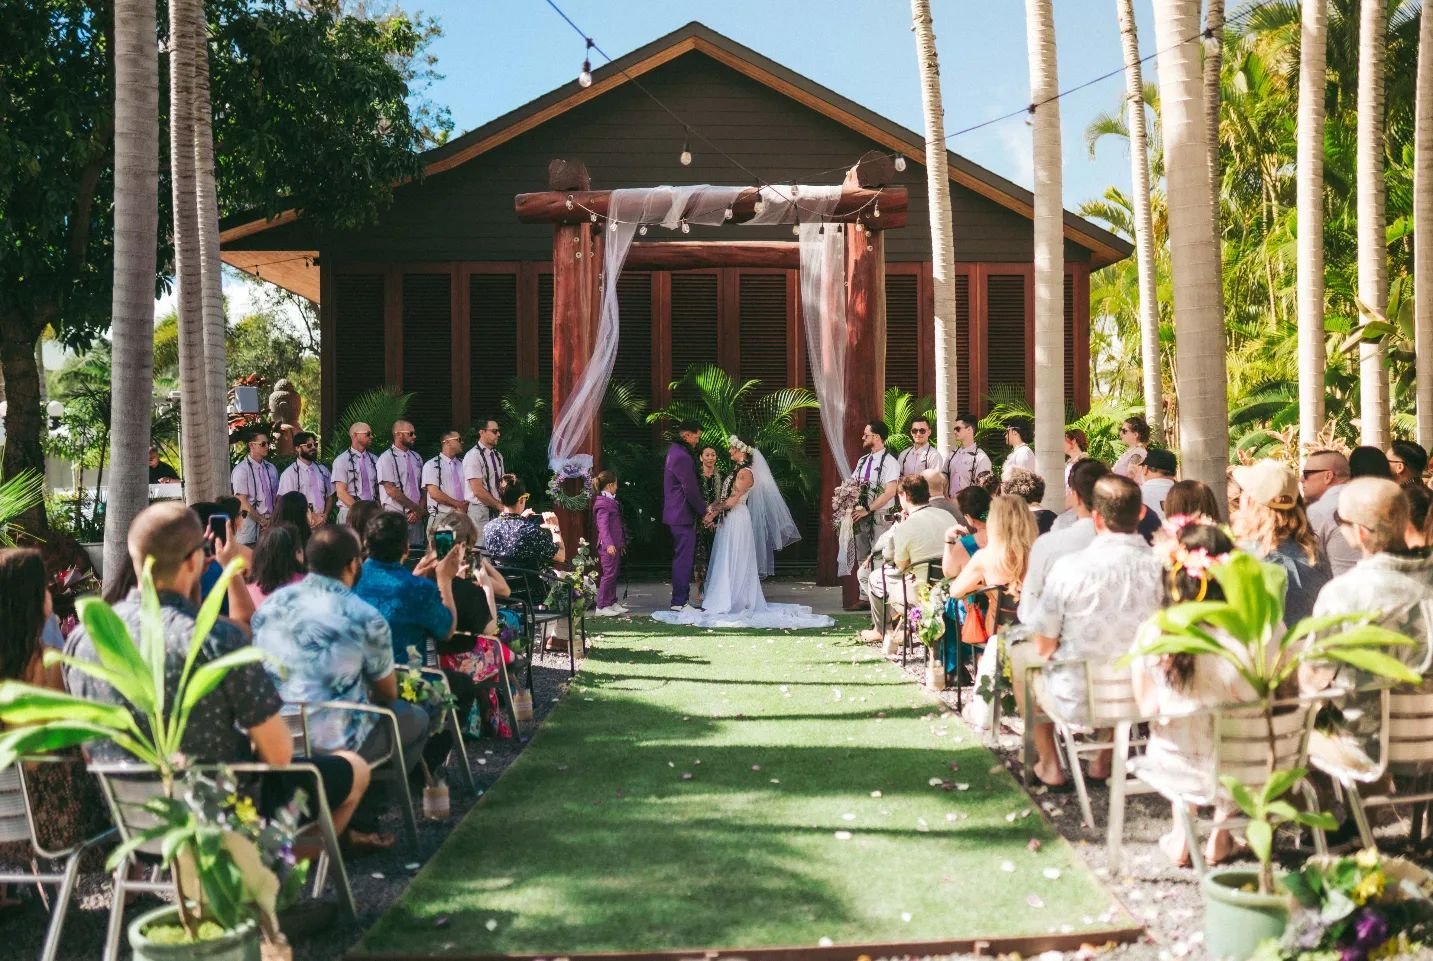 So far, this is my favorite photo that I took for the Maui Wedding. Your normal ceremony, in such a beautiful place, with awesome people. I'd rather shoot here than anywhere else.🌴📸
.
#maui #mauiphotographer #mauiwedding #mauiweddingphotographer #h